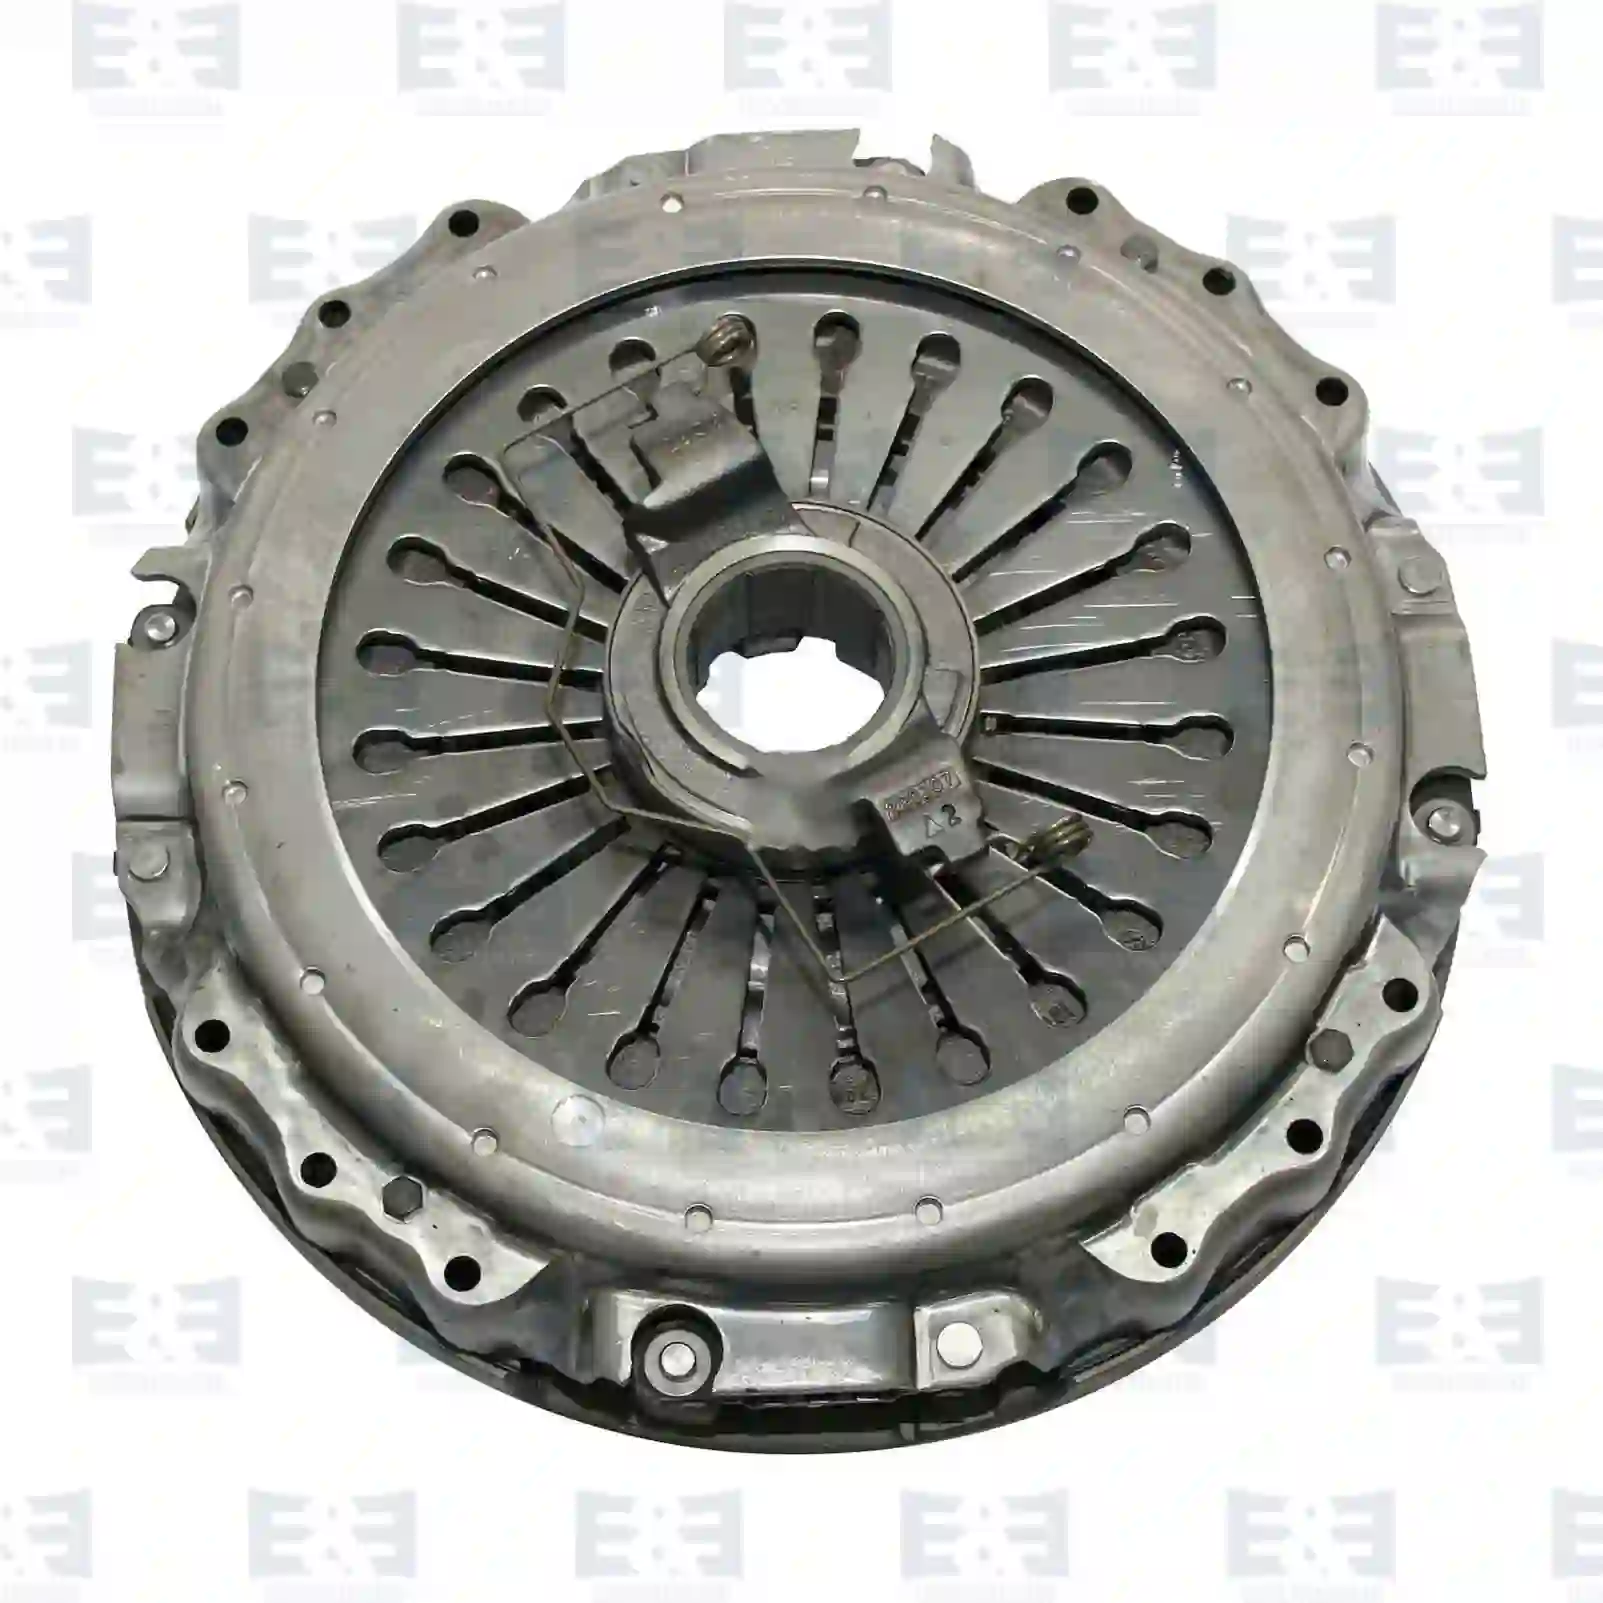 Clutch cover, with release bearing, 2E2288848, 1521714, 20571923, 3192203, 8113515, 8113946, 8171494 ||  2E2288848 E&E Truck Spare Parts | Truck Spare Parts, Auotomotive Spare Parts Clutch cover, with release bearing, 2E2288848, 1521714, 20571923, 3192203, 8113515, 8113946, 8171494 ||  2E2288848 E&E Truck Spare Parts | Truck Spare Parts, Auotomotive Spare Parts